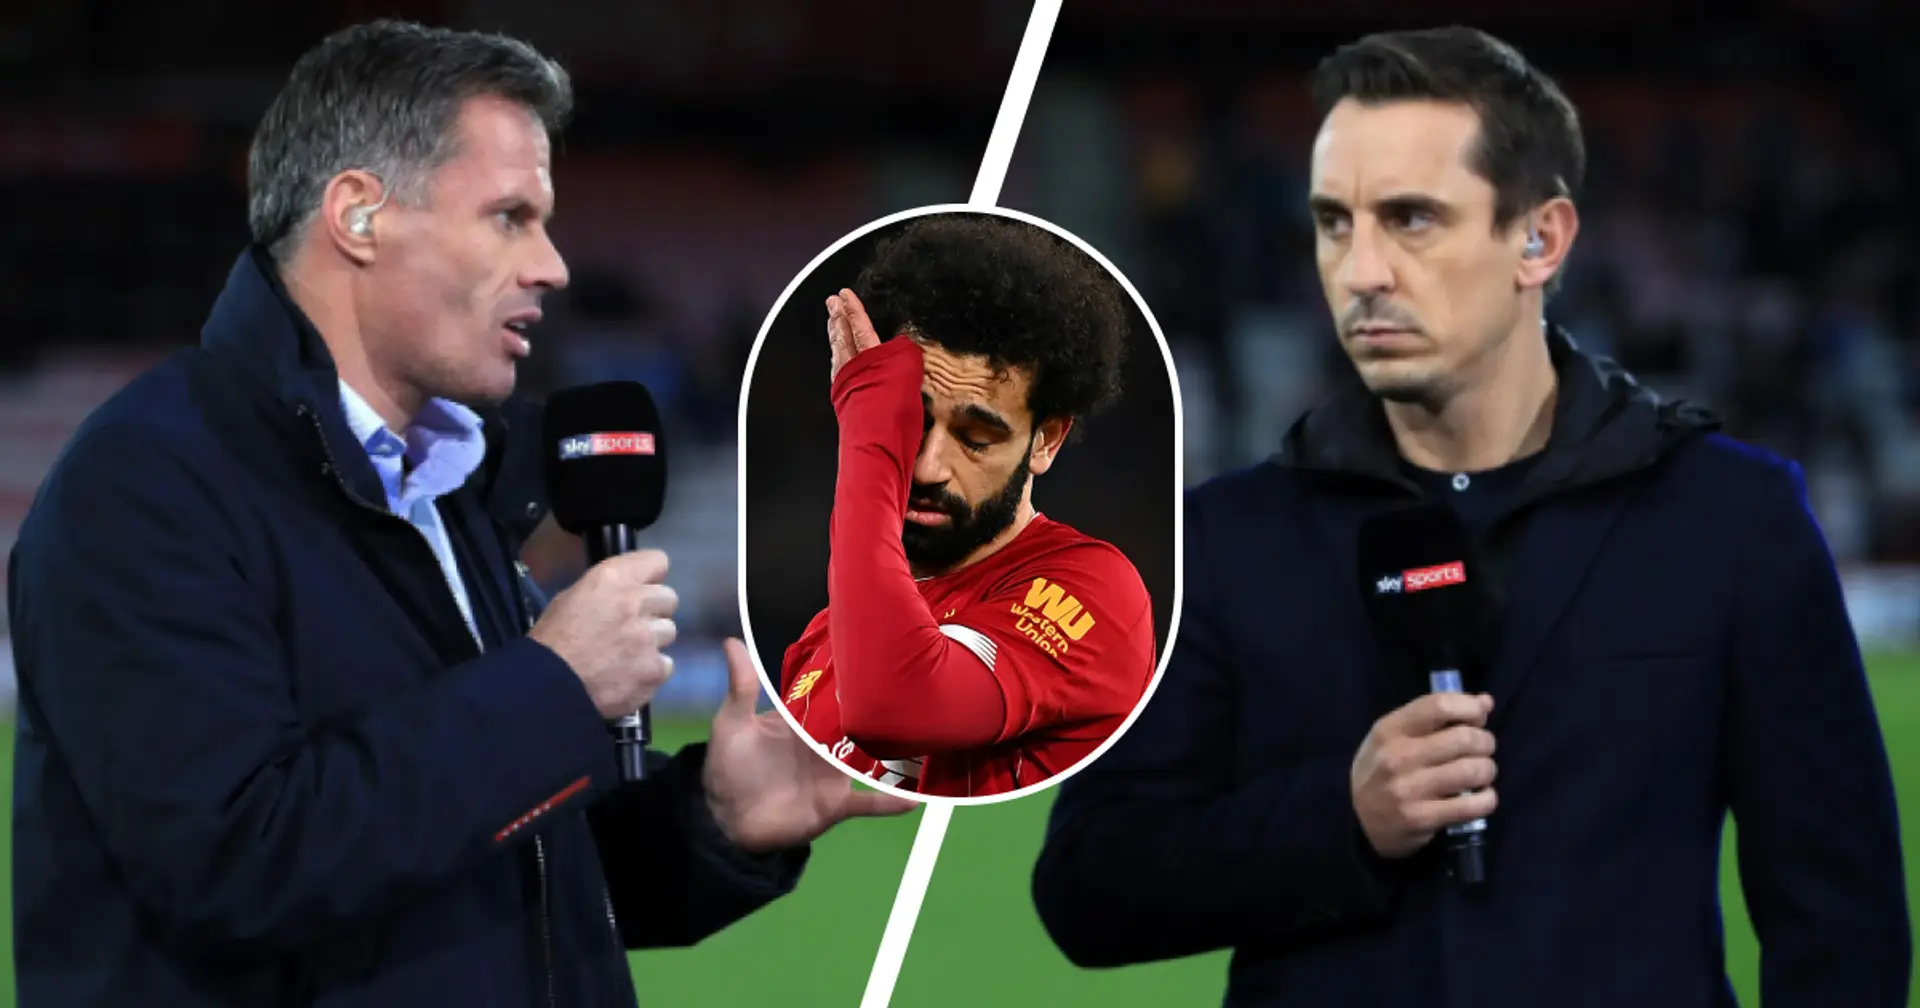 Disagreement over Salah: Neville and Carragher clash in Premier League team selection